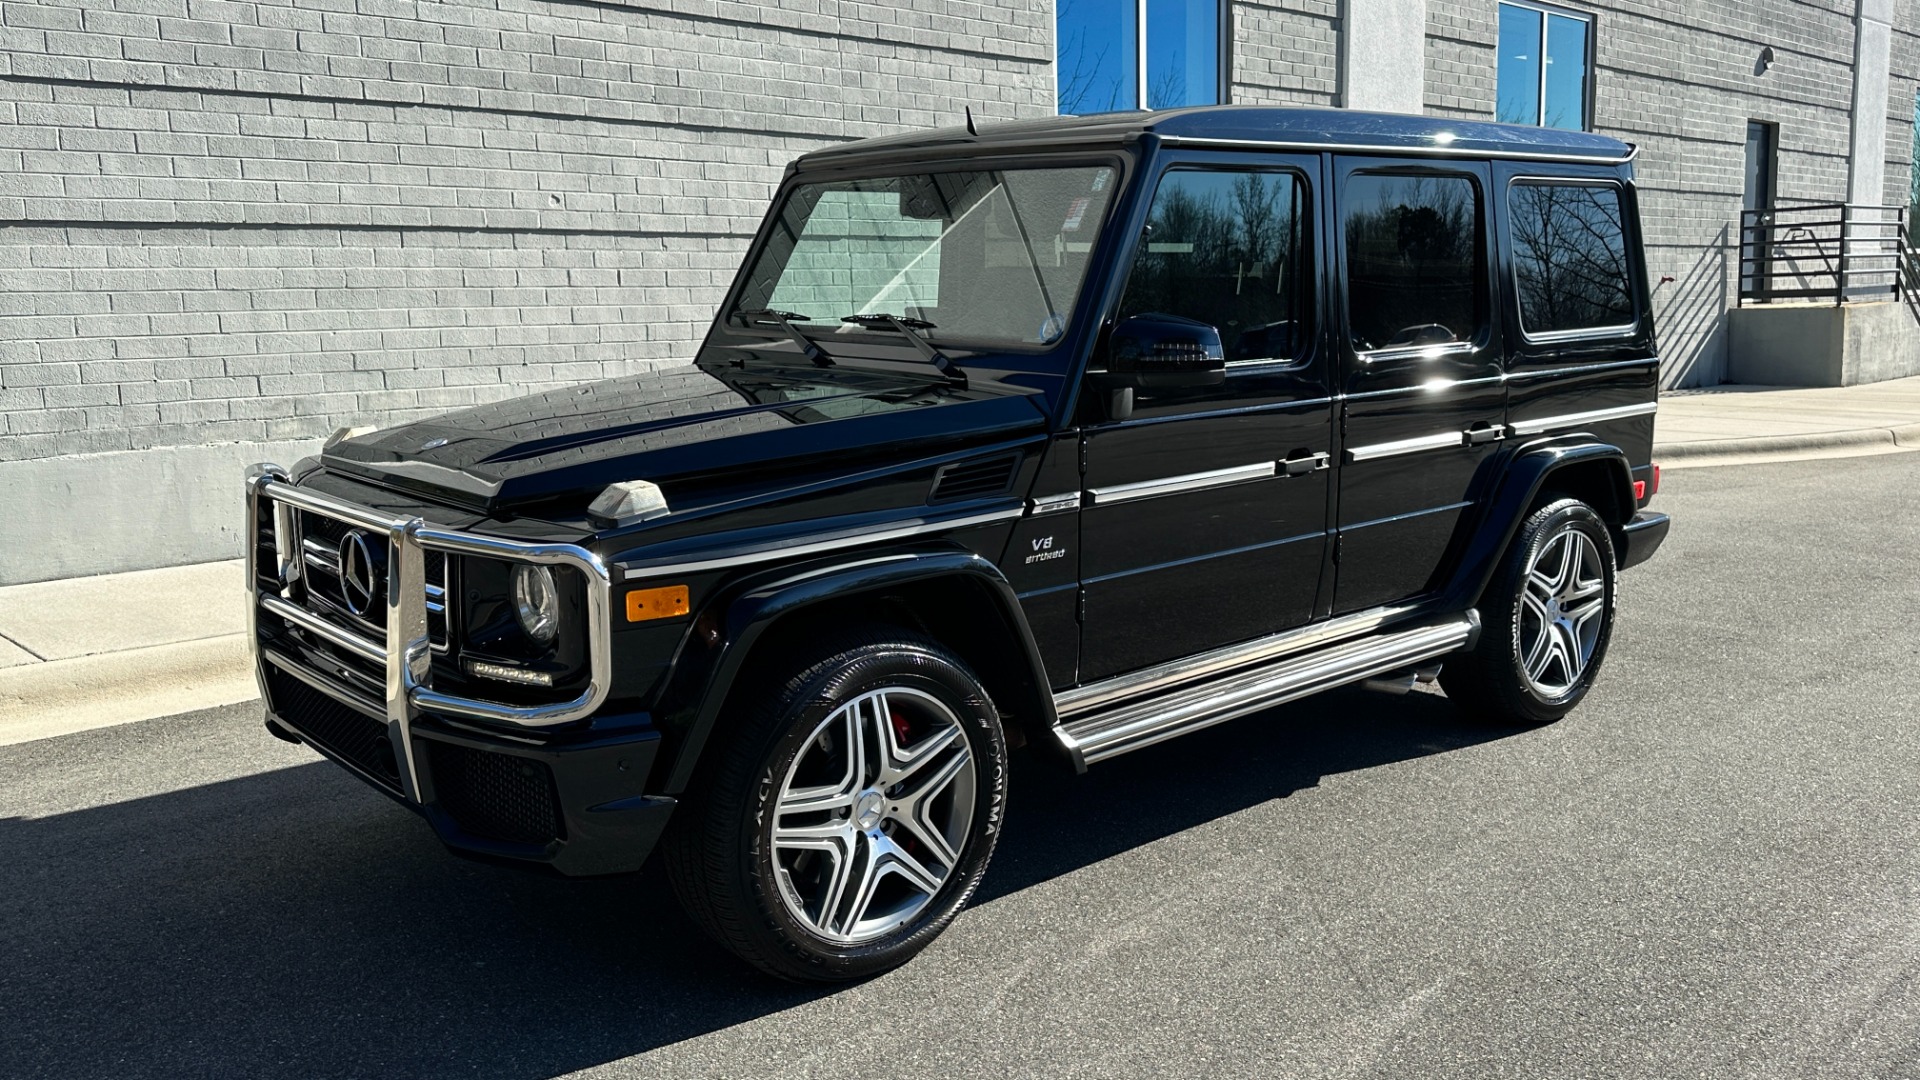 Used 2013 Mercedes-Benz G-Class G63 AMG / DESIGNO INTERIOR / DESIGNO TRIM / 20IN AMG WHEELS for sale $74,995 at Formula Imports in Charlotte NC 28227 2